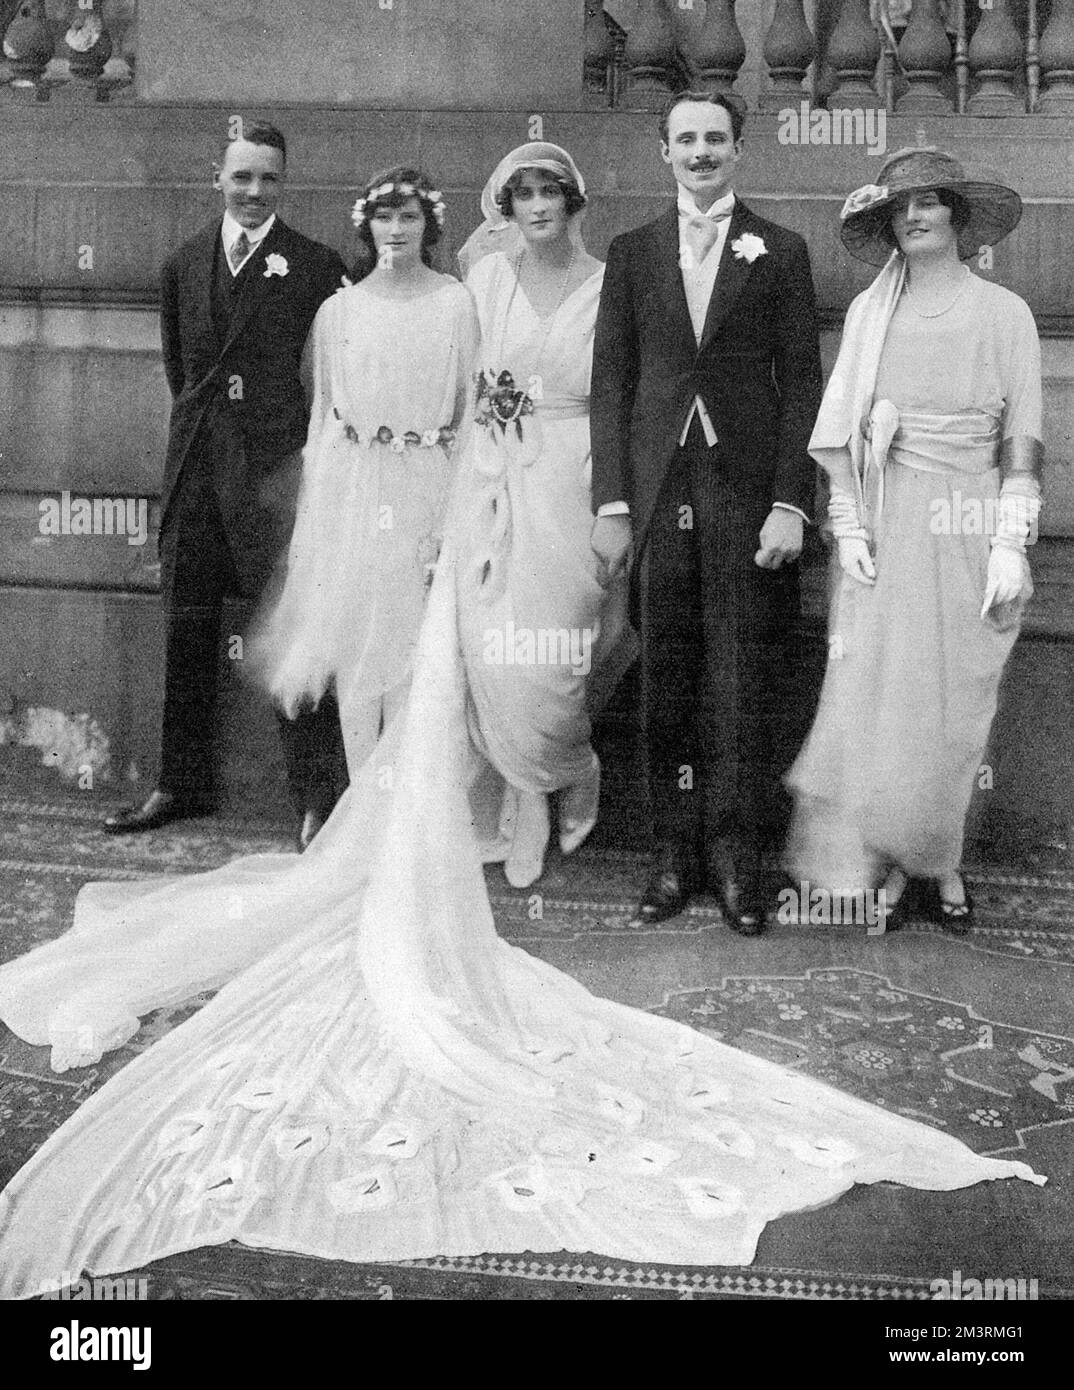 The wedding of Lady Cynthia Curzon and Sir Oswald Mosley in May 1920 at the Chapel Royal, St James's.  From left, Captain, the Hon. Bruce Ogilvy as best man, Lady Irene Curzon, Lady Cynthia Mosley, Oswald Mosley, Lady Alexandra Curzon (later Alexandra 'Baba' Metcalfe).       Date: 1920 Stock Photo